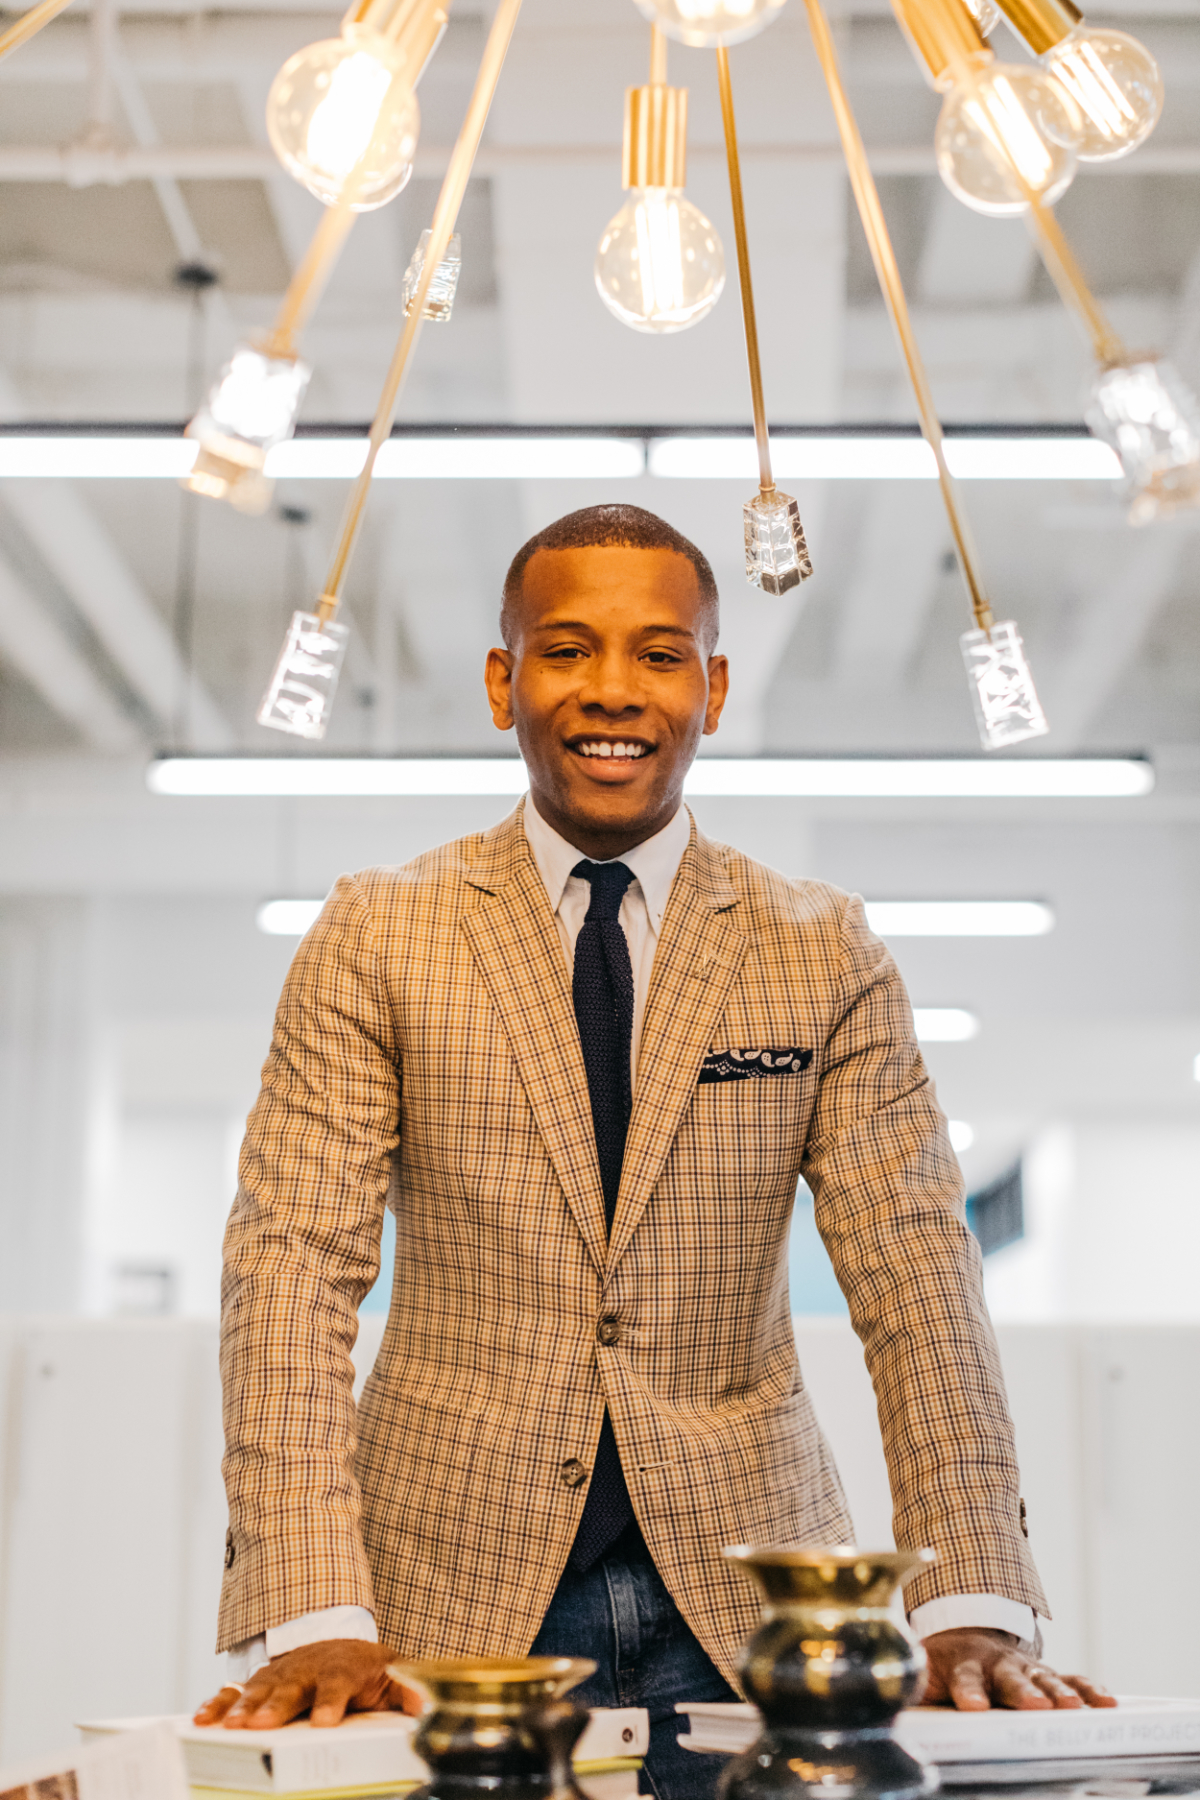 Sabir M. Peele of Men's Style Pro at Philly Mag Office wearing Lido Suit via ModaMatters Creative Office Style